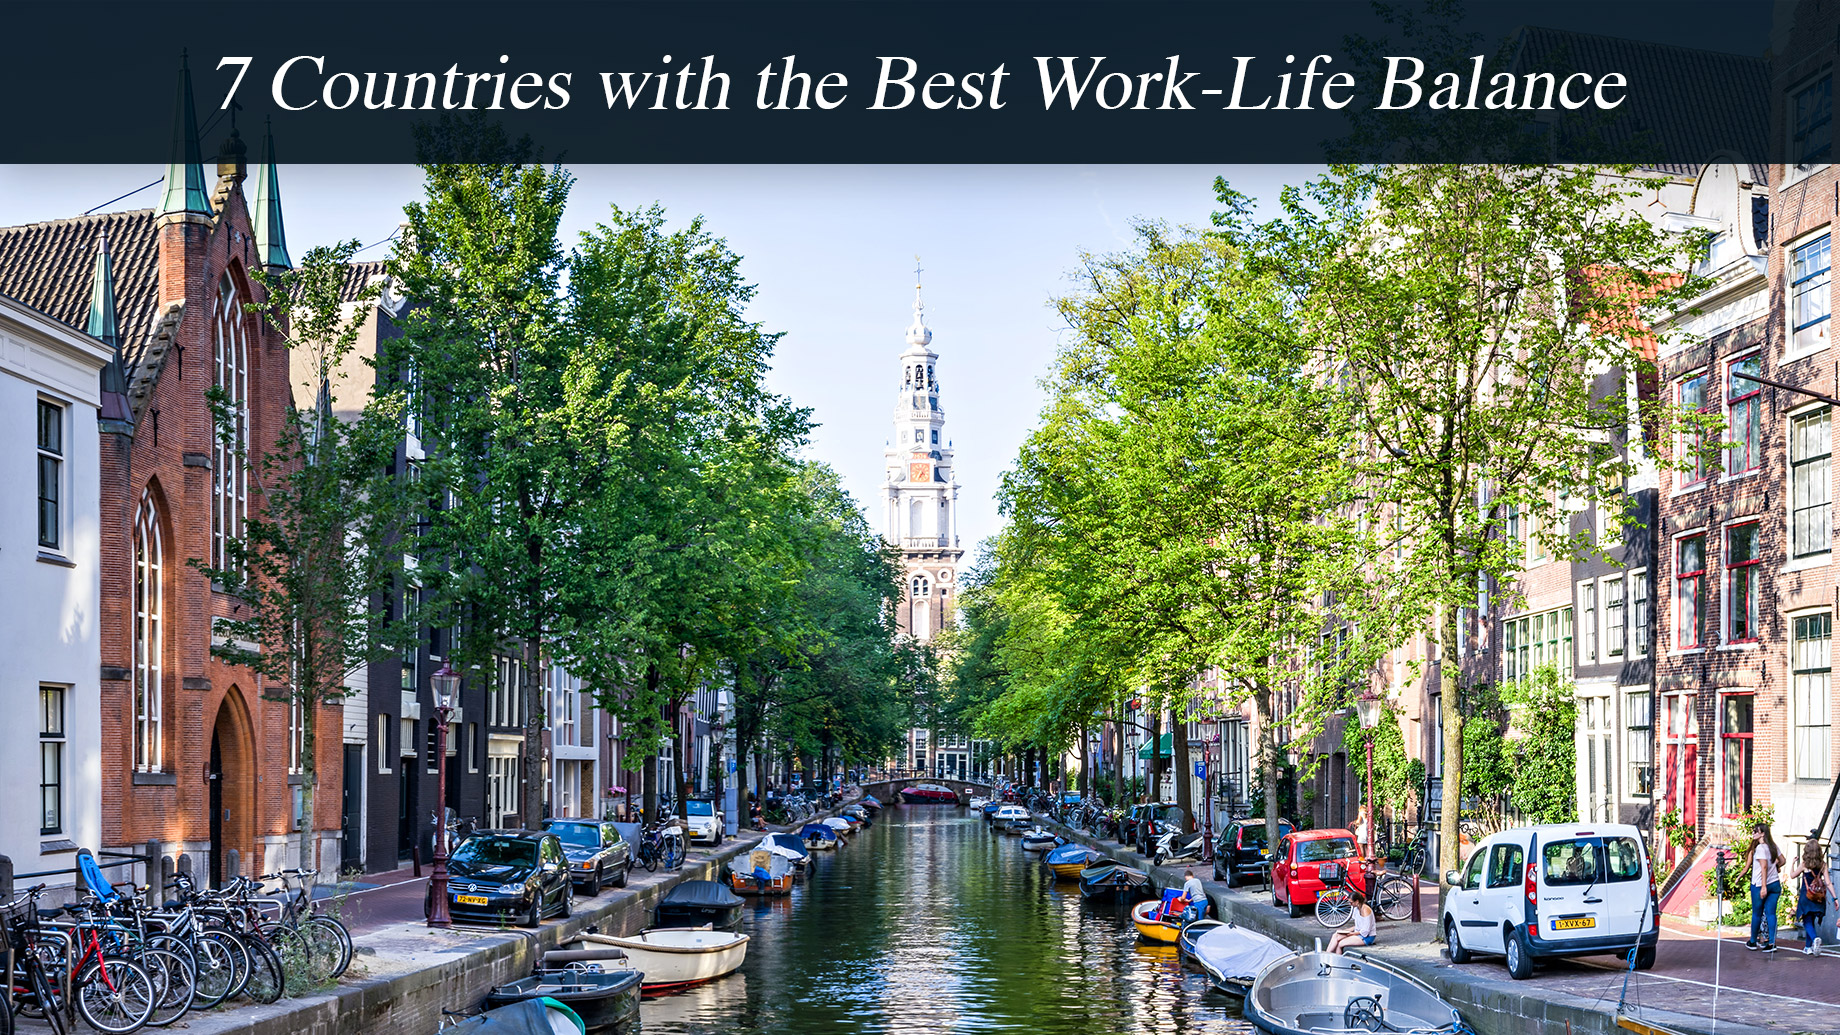 7 Countries with the Best Work-Life Balance